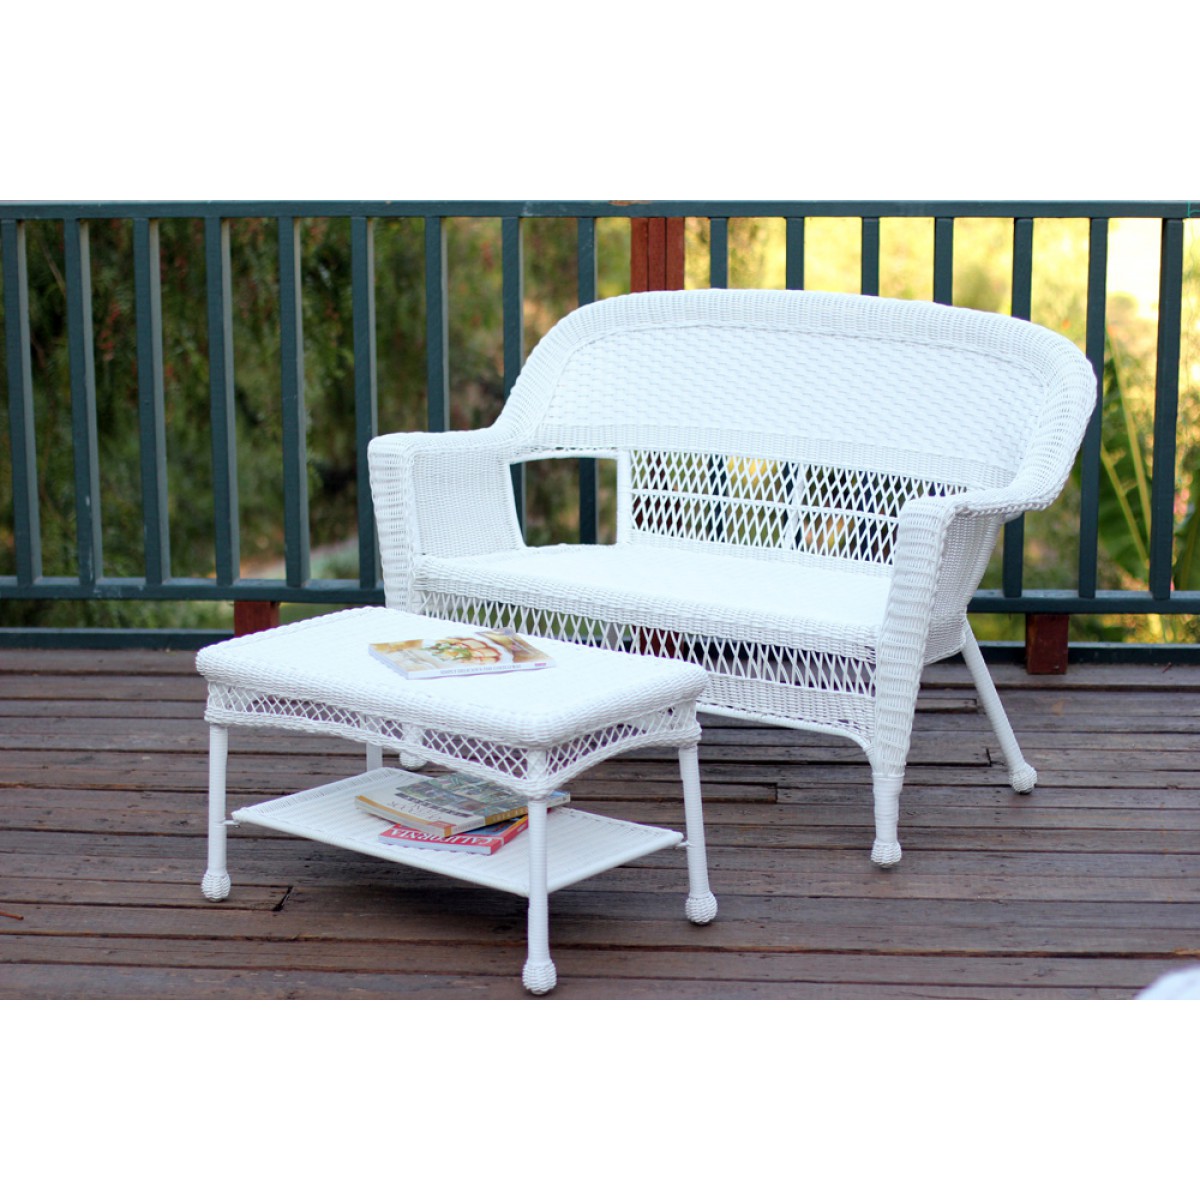 White Wicker Patio Love Seat And Coffee Table Set Without Cushion